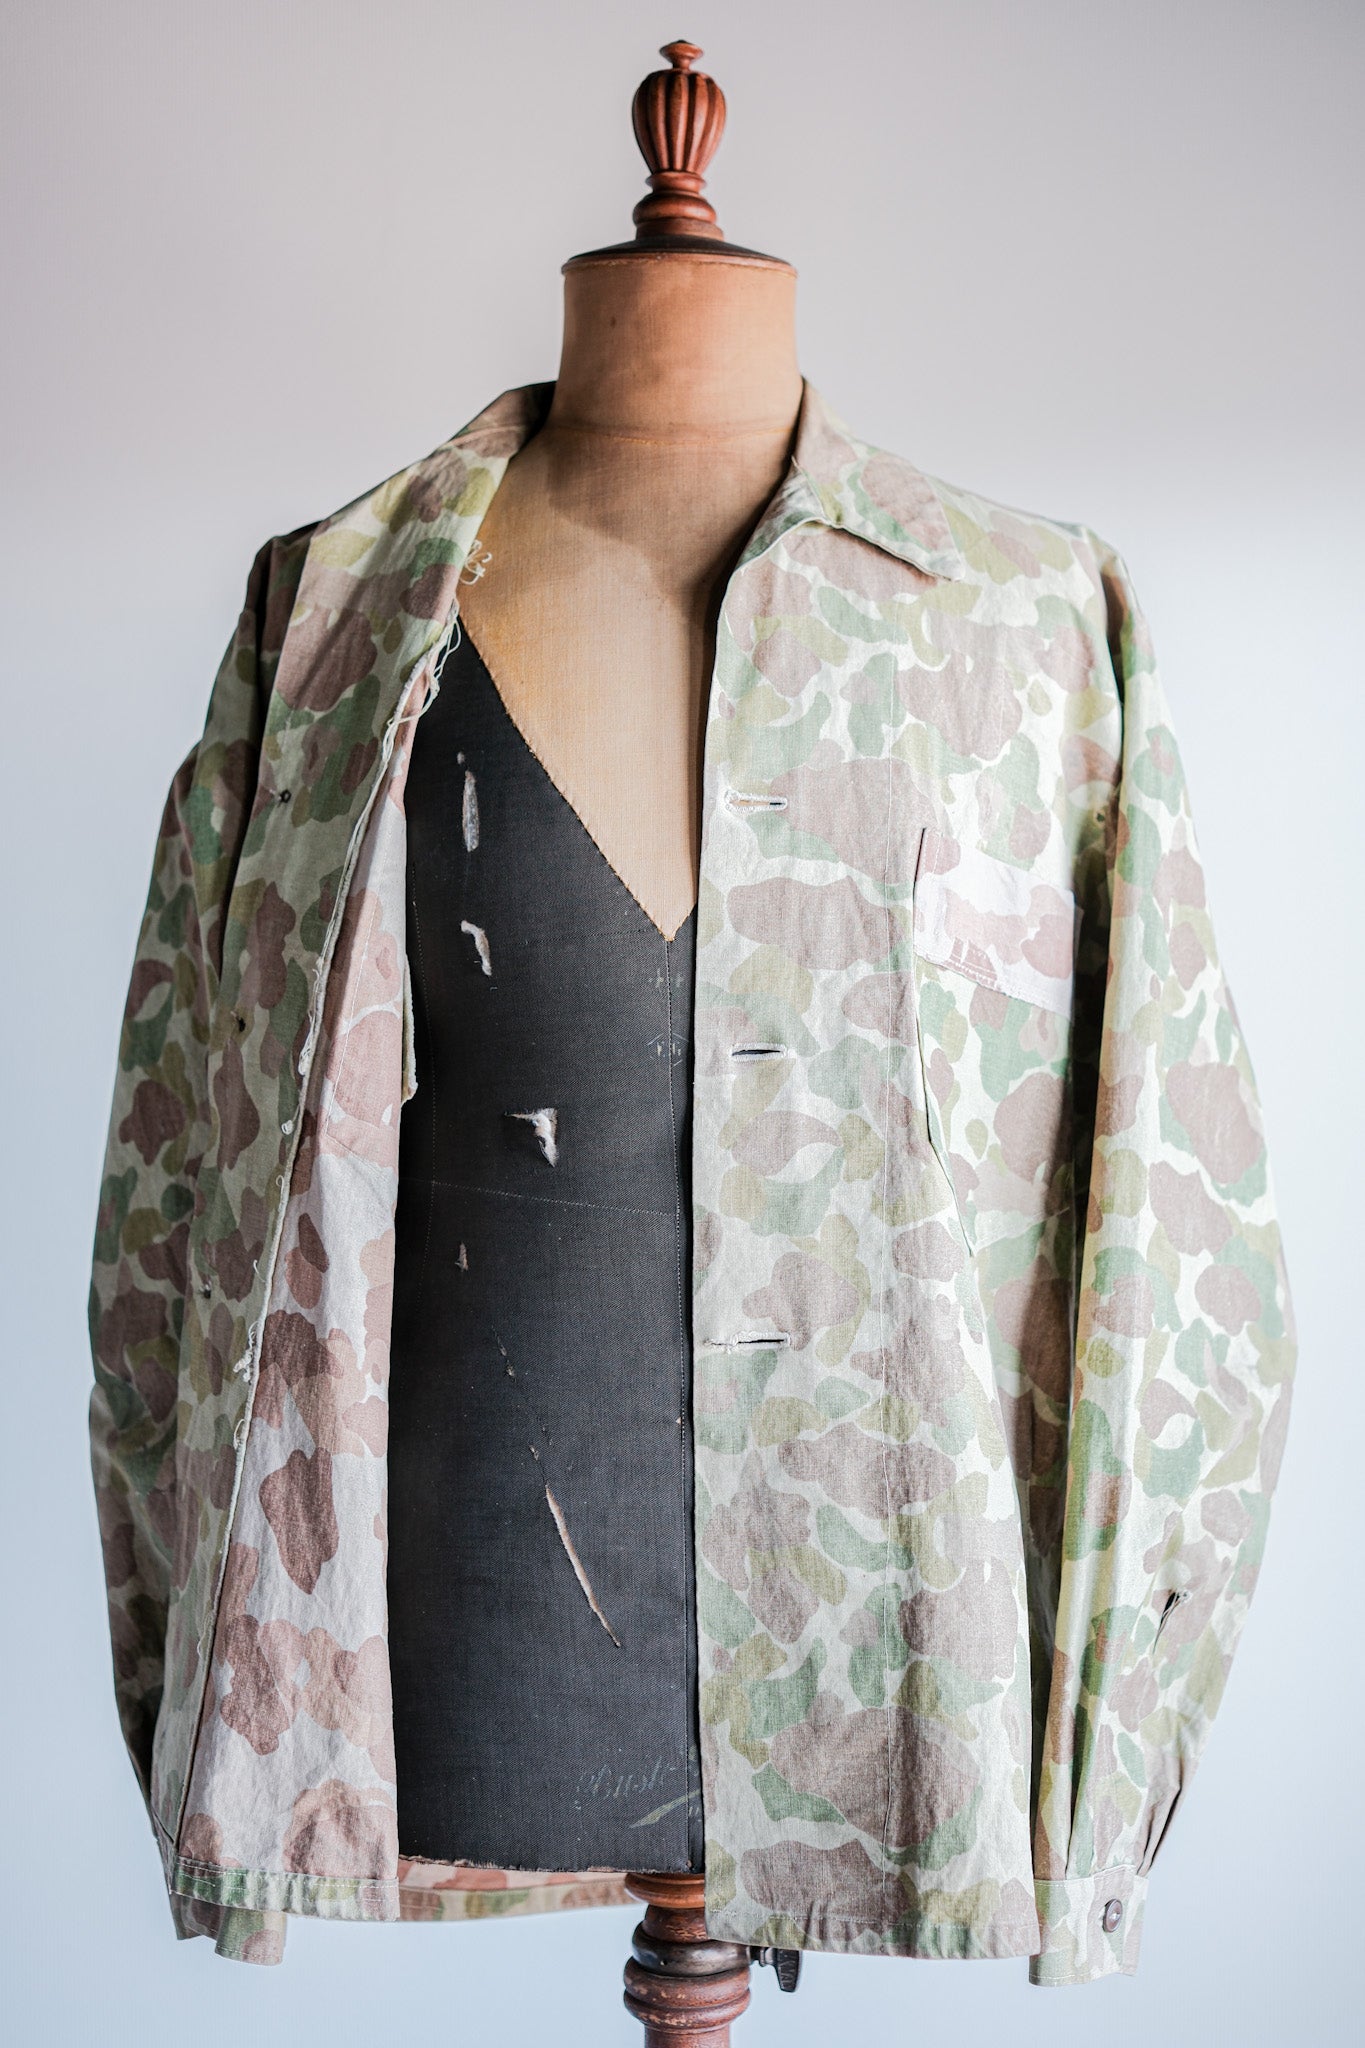 [~ 50's] American Vintage Occupation Taylor Made FROGSKIN CAMOUFLAGE JACKET "U.S.M.C Material"